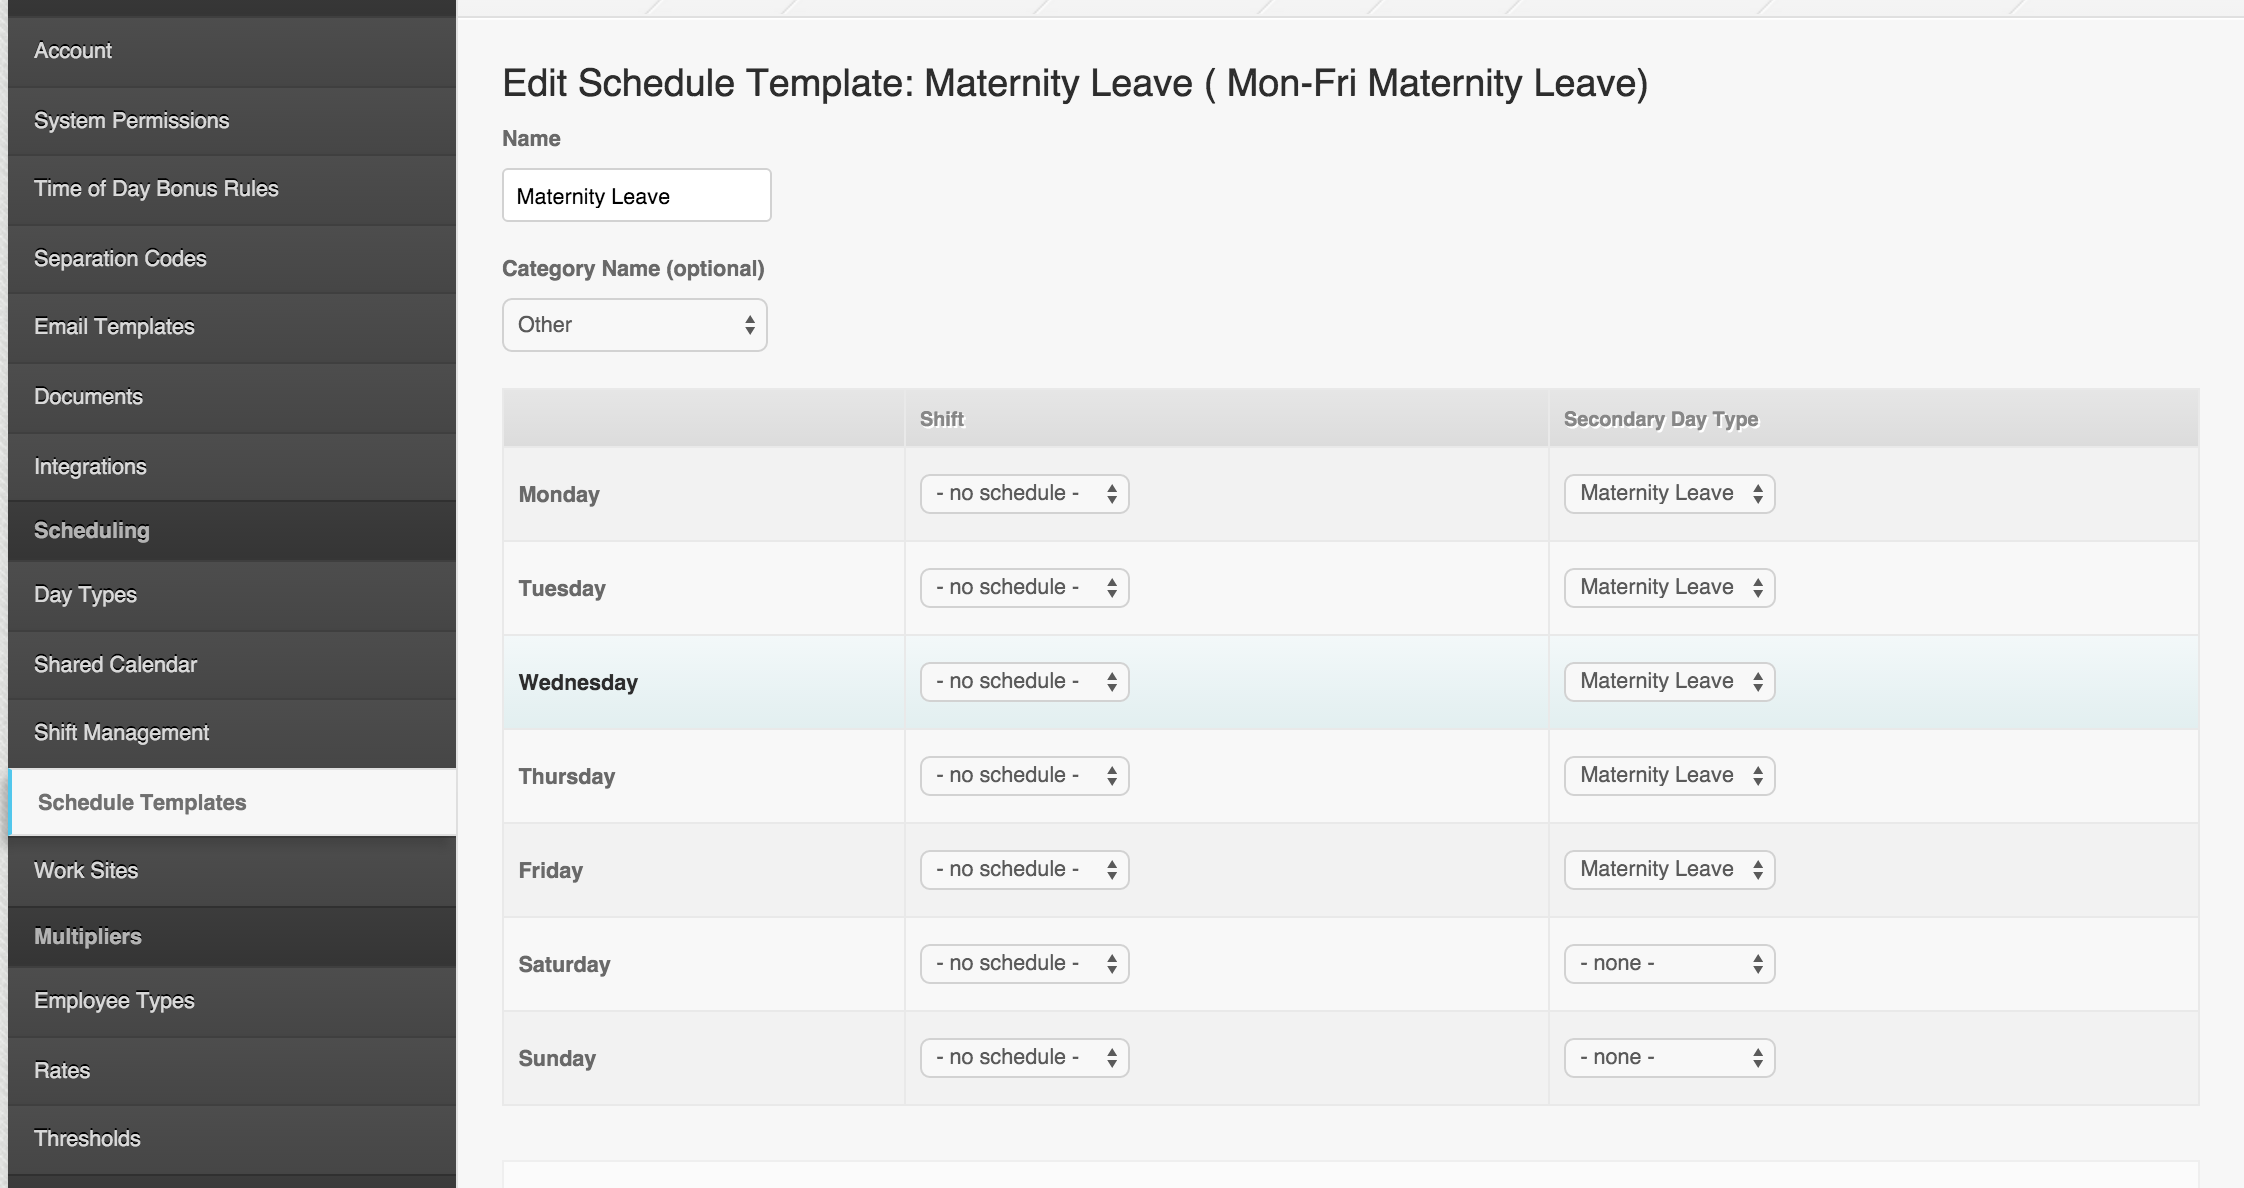 How to set up Maternity Leave Notice on the Employee’s Schedule